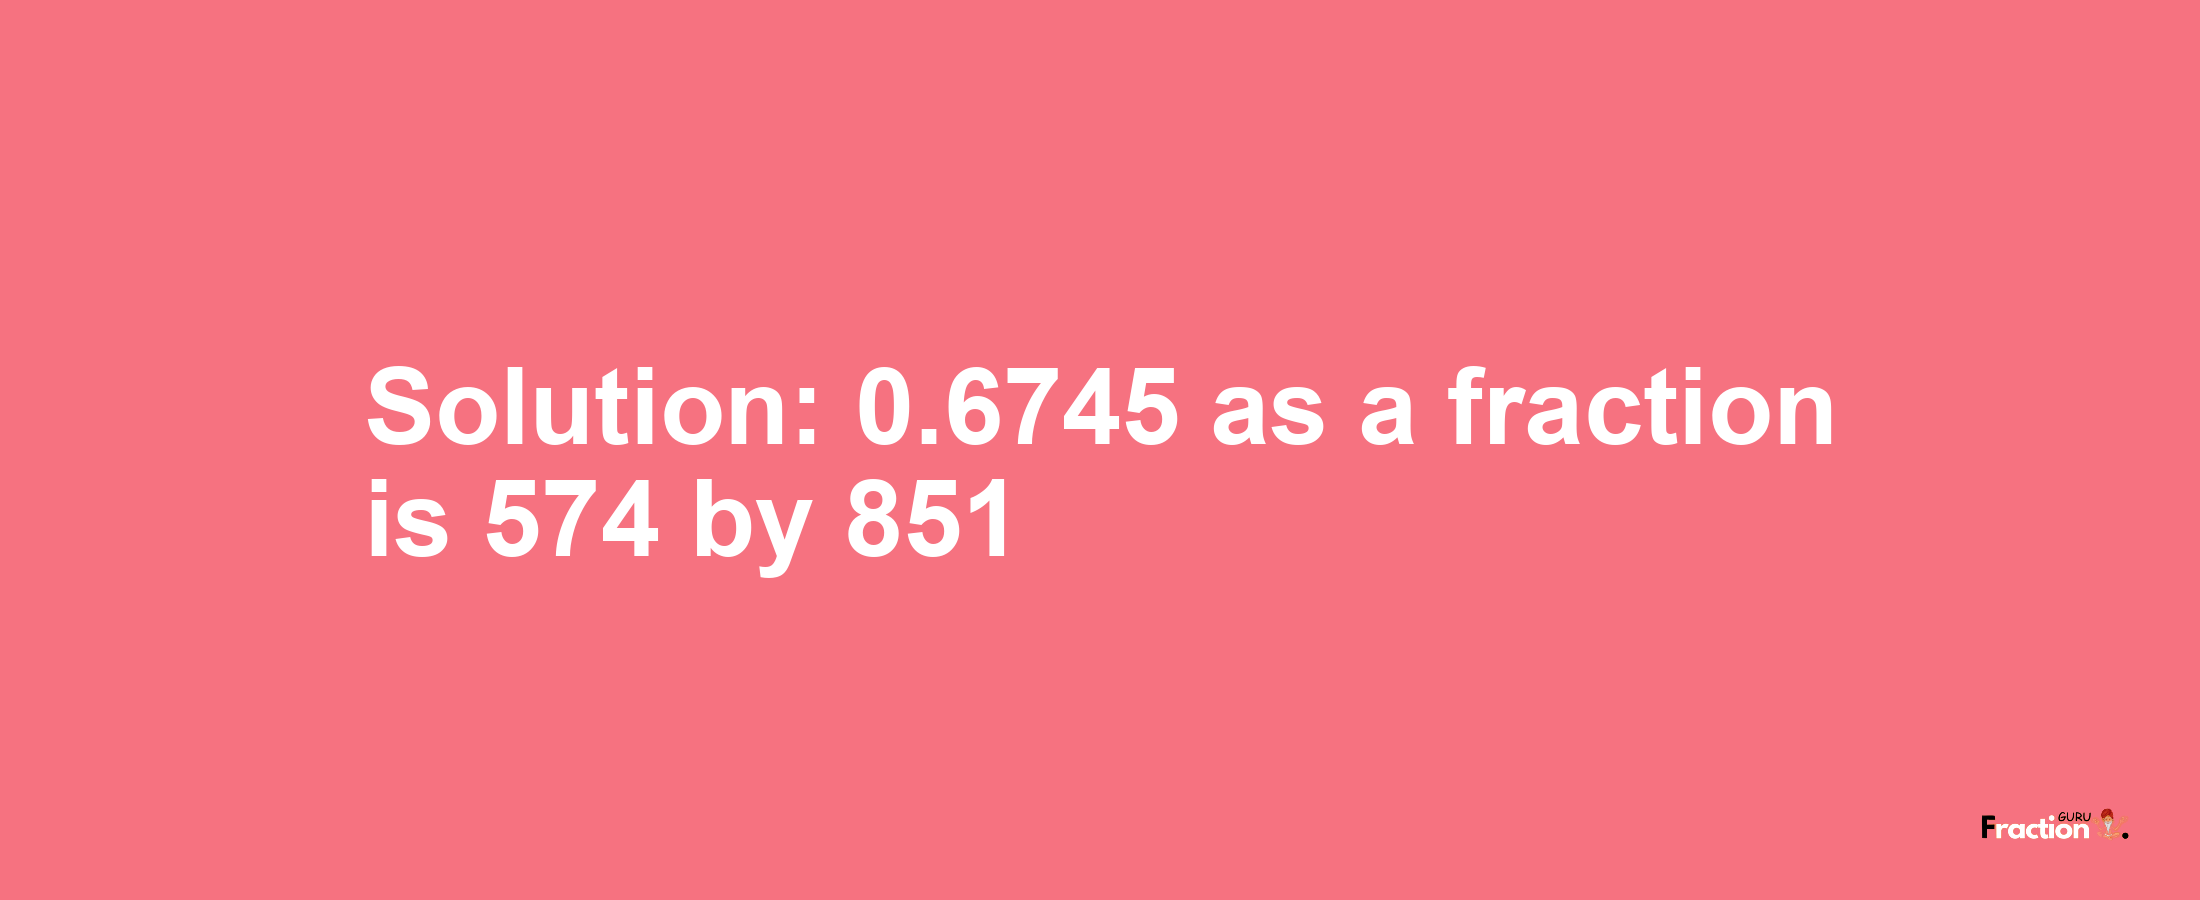 Solution:0.6745 as a fraction is 574/851